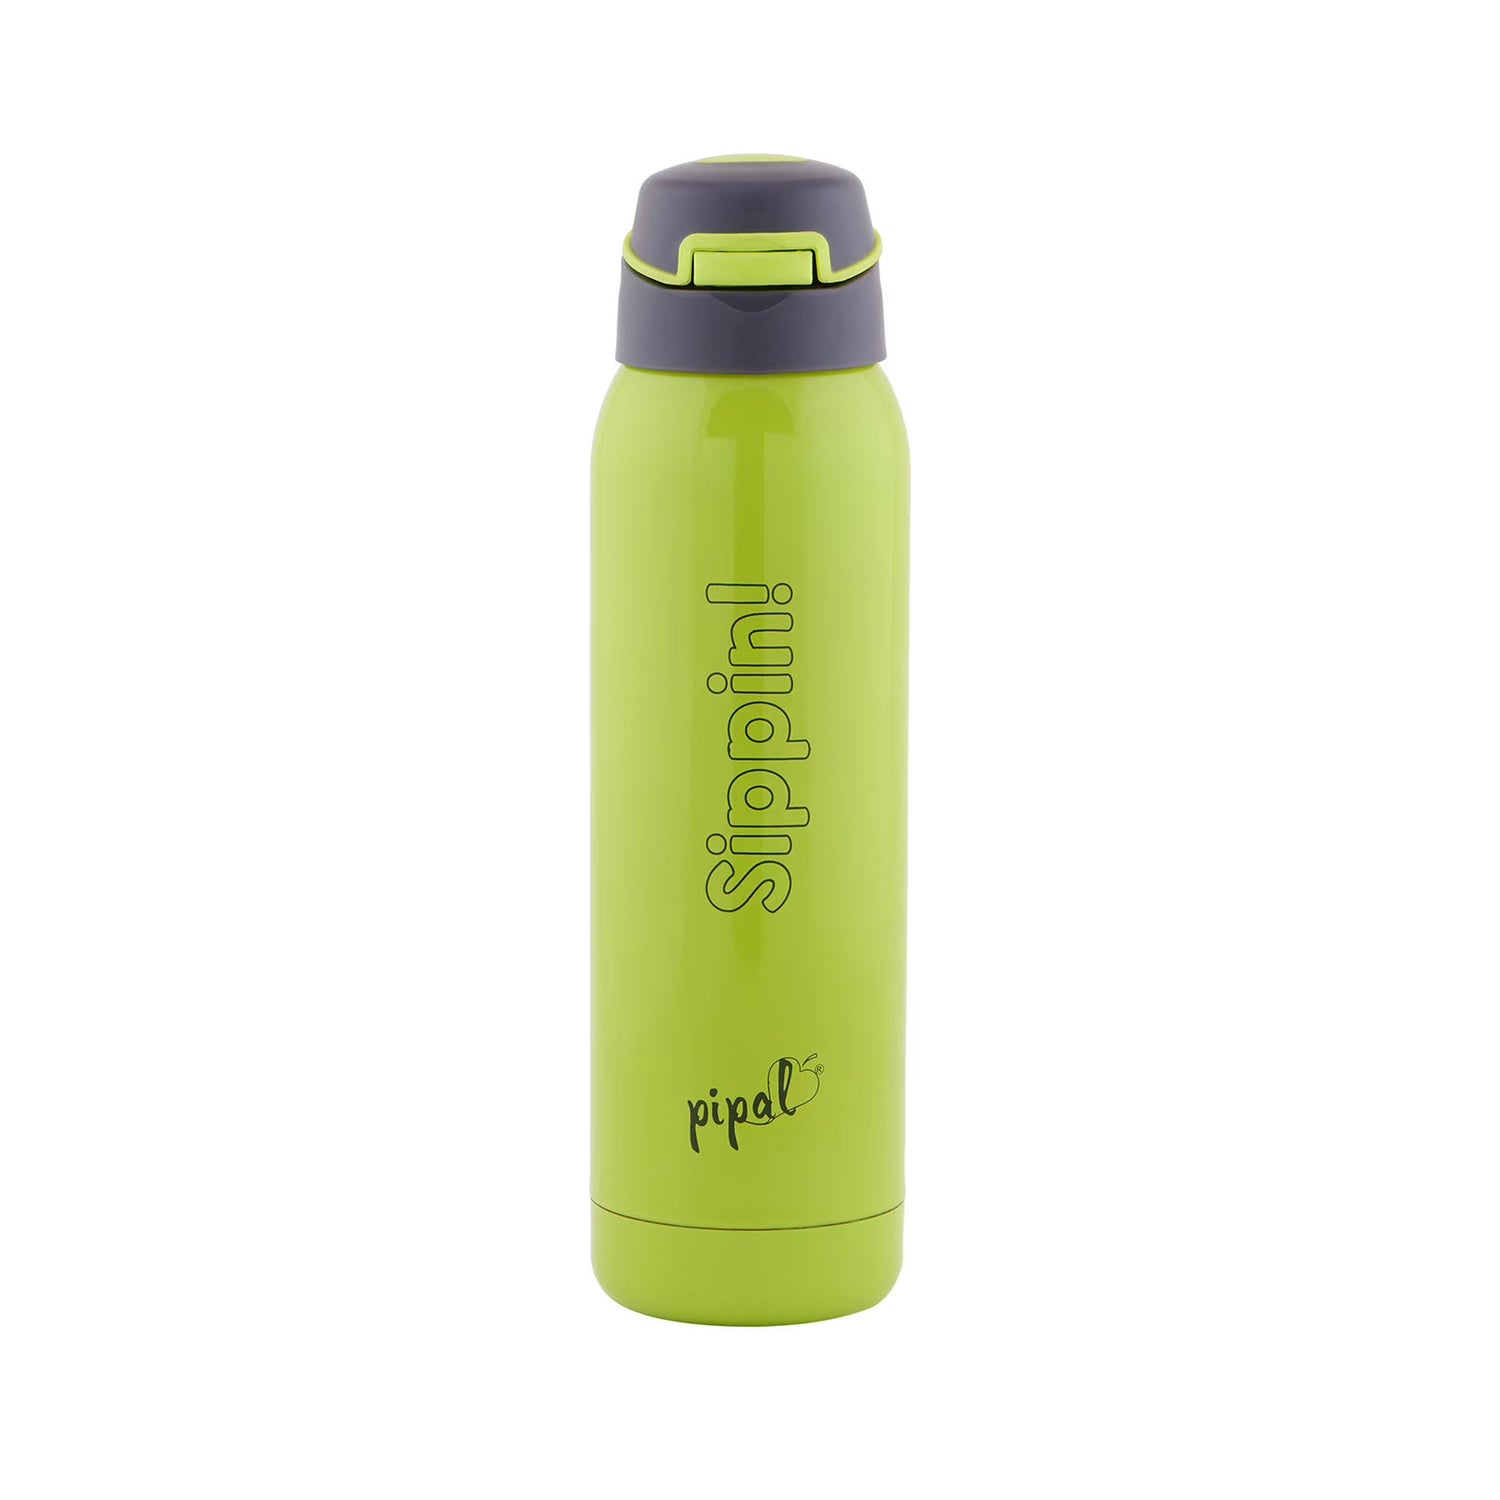 Pipal Ruby Insulated Water Bottle